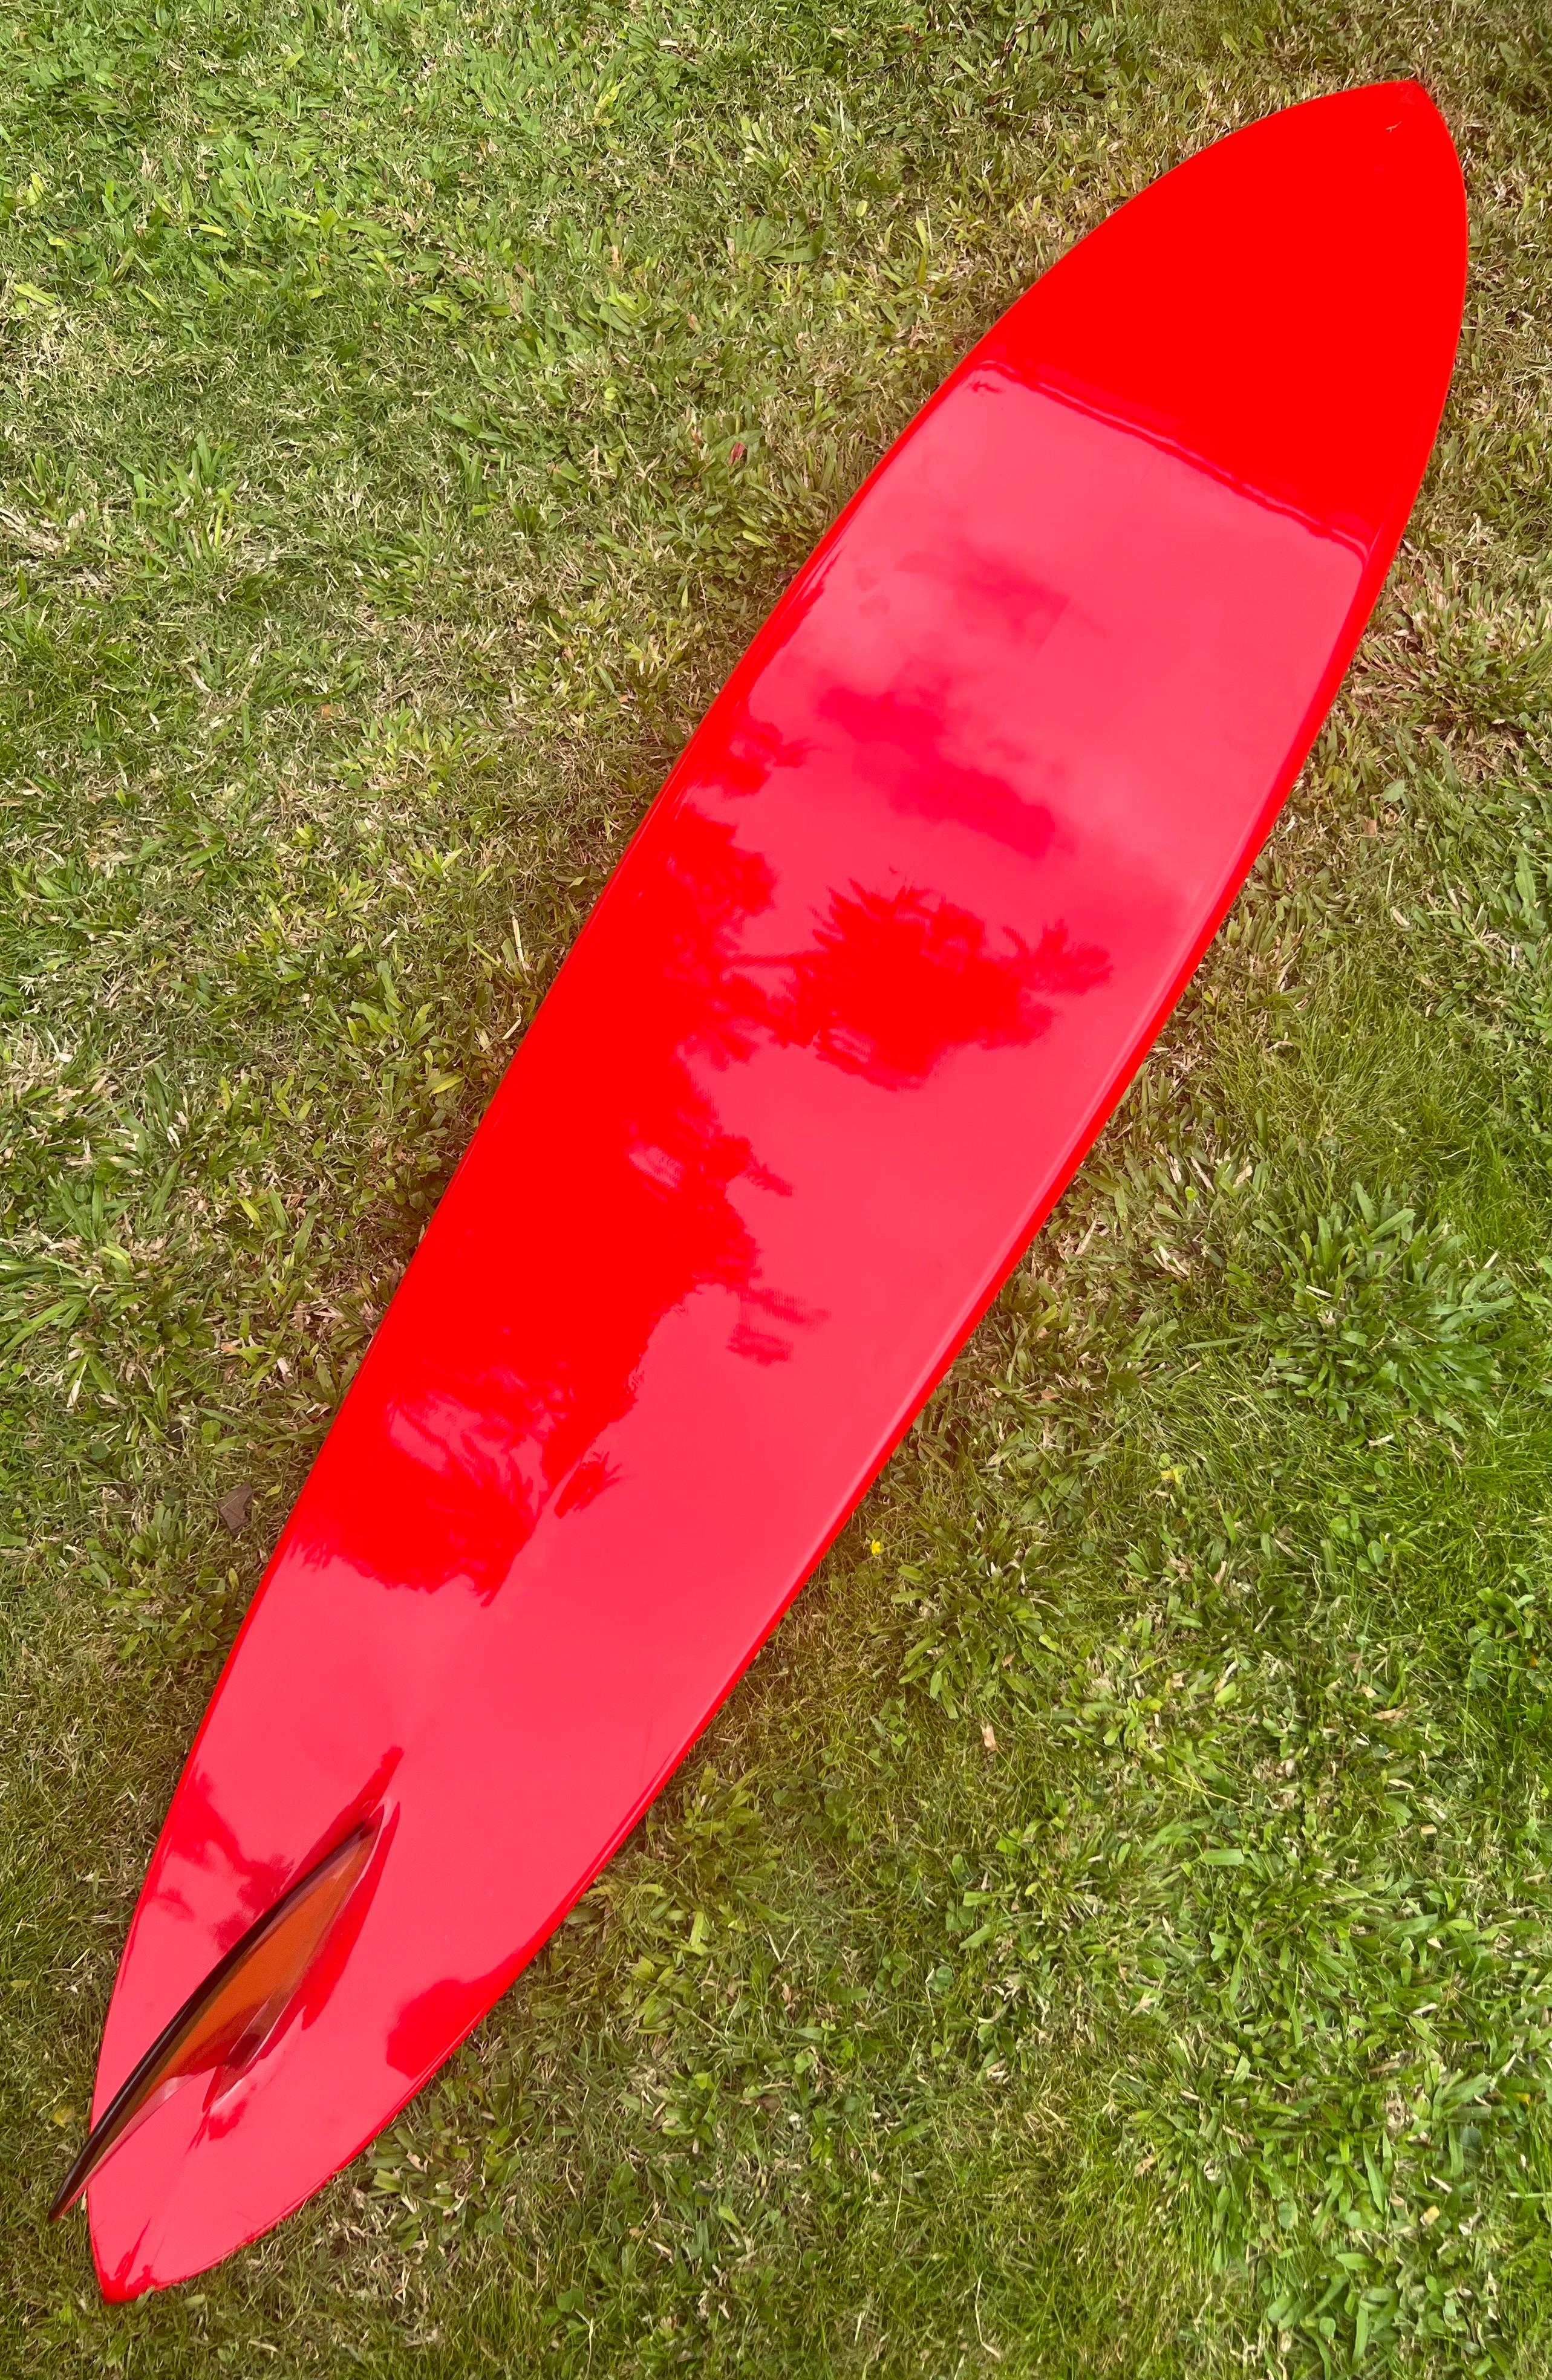 Contemporary 1968 Replica Lahaina Clinton Blears model surfboard by Dick Brewer For Sale